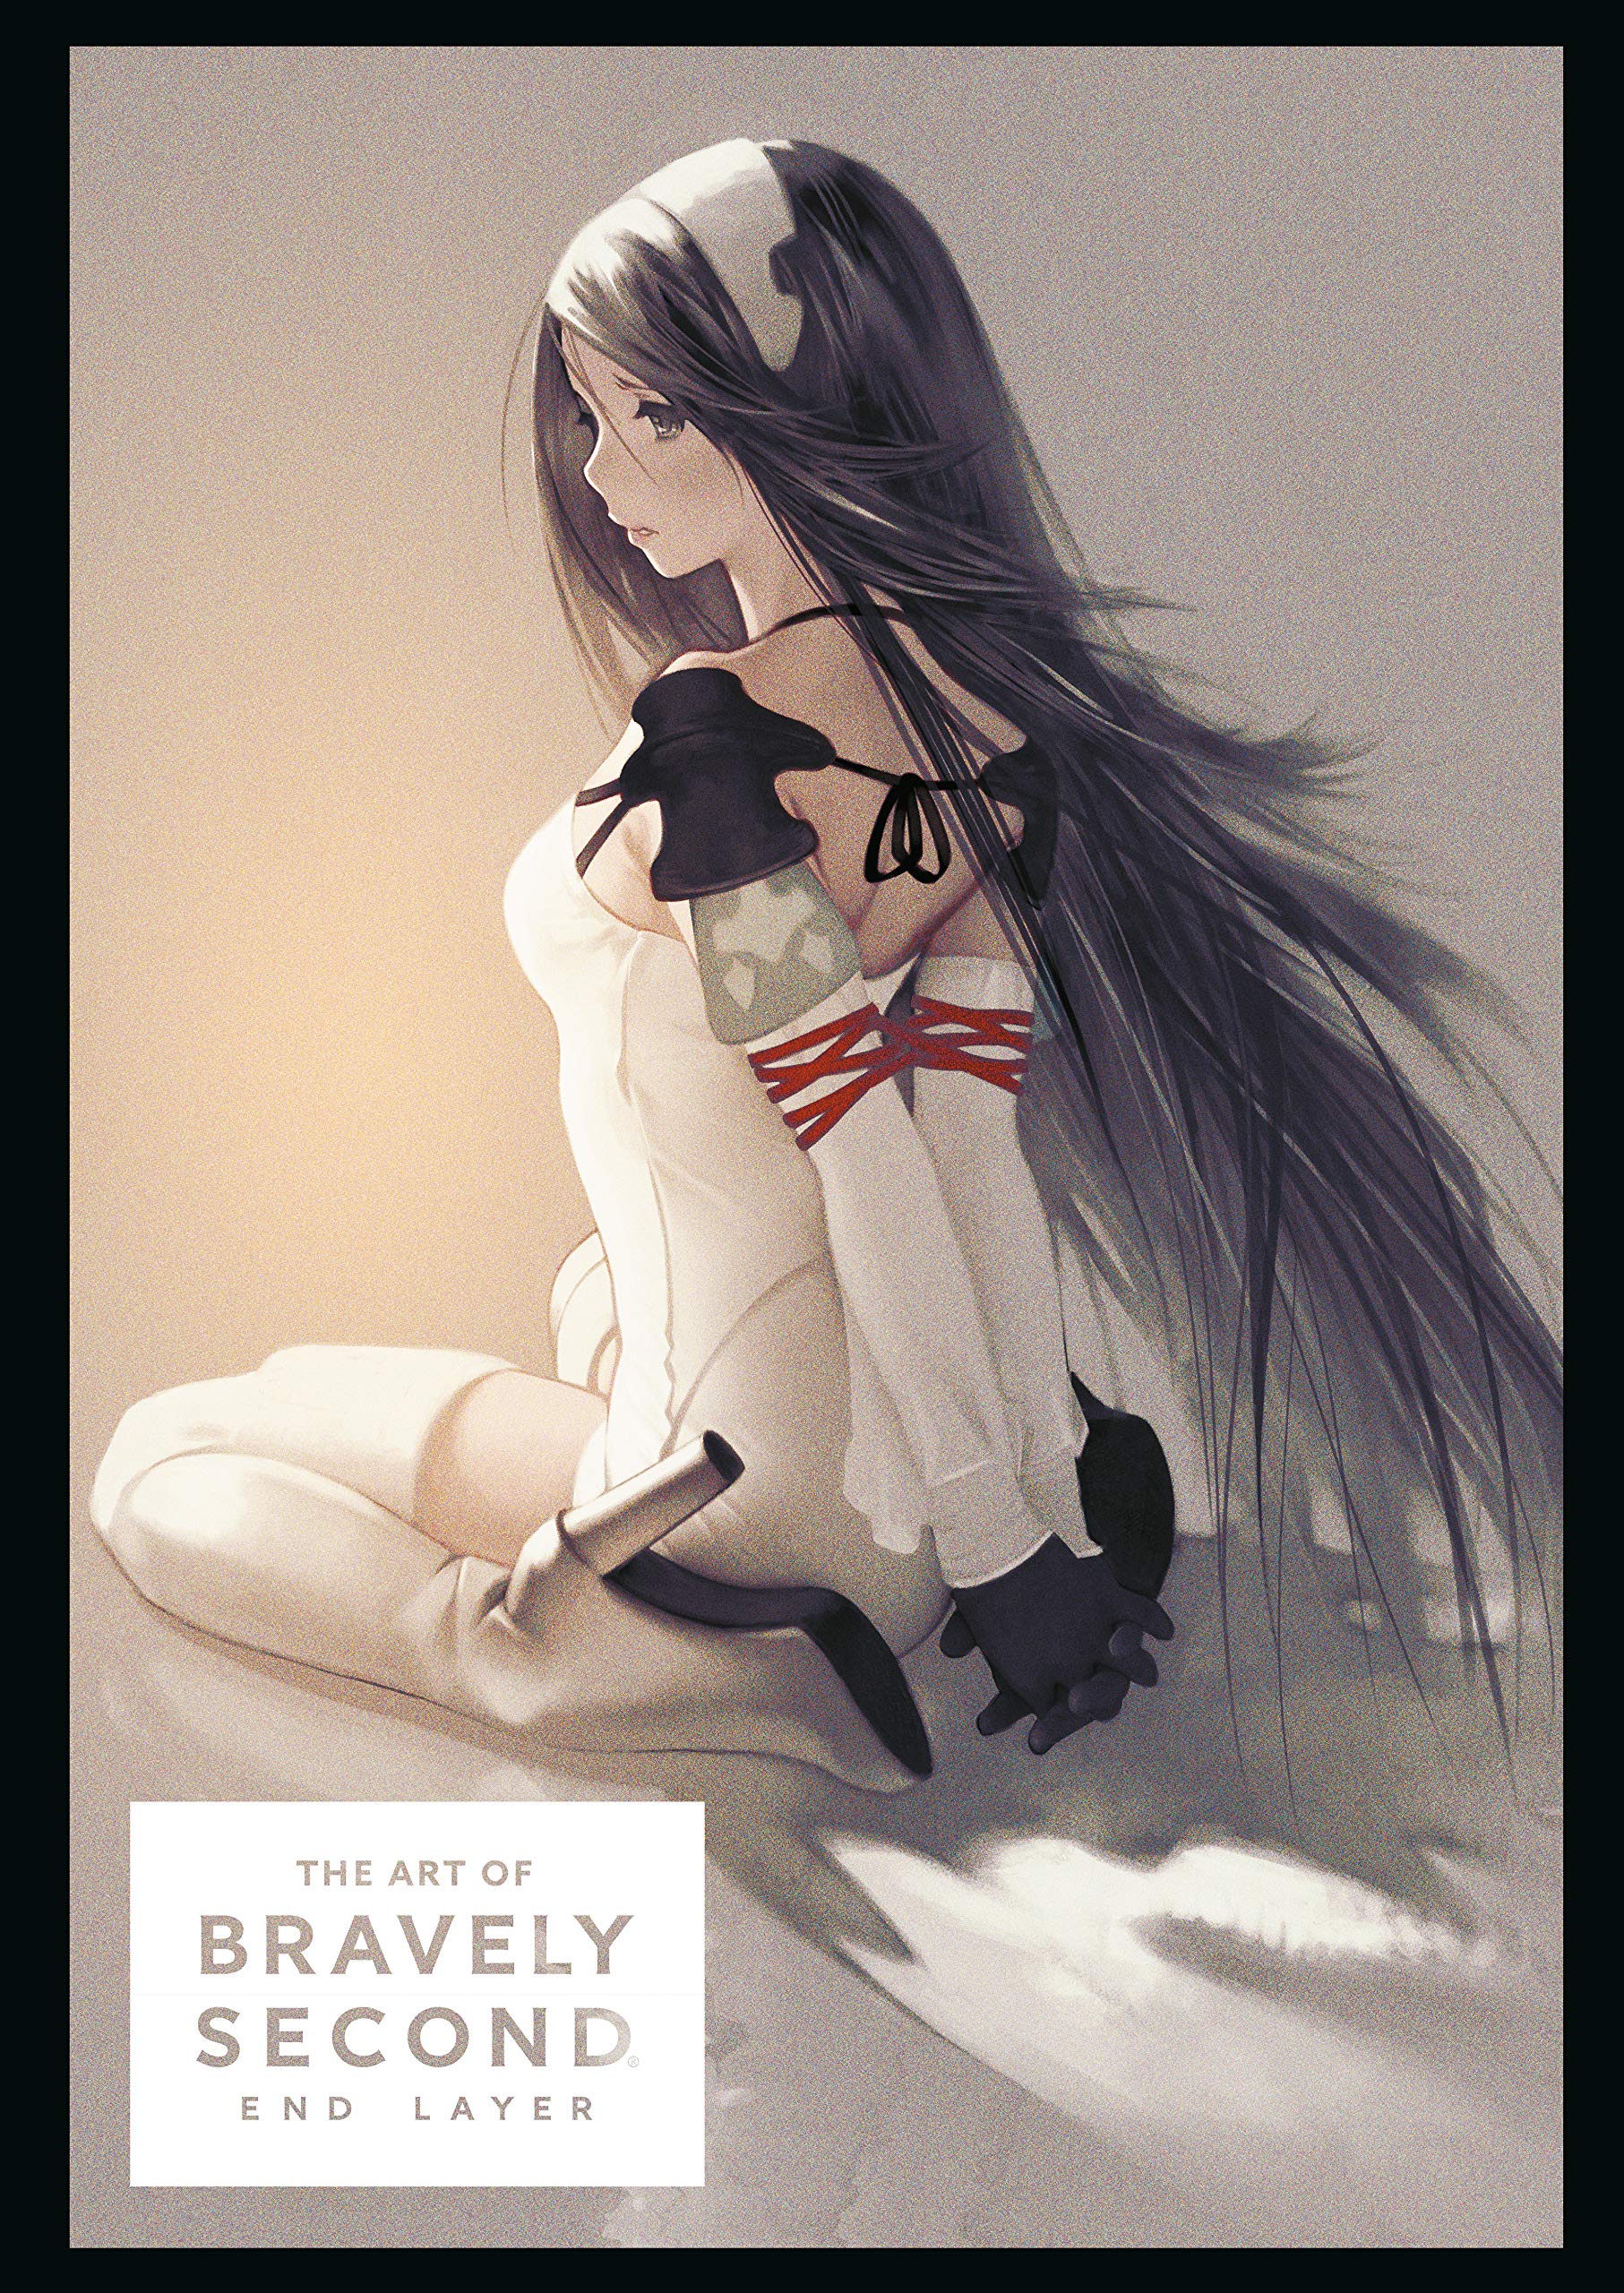 The Art of Bravely Second: End Layer | Square Enix, Tomoya Asano image0